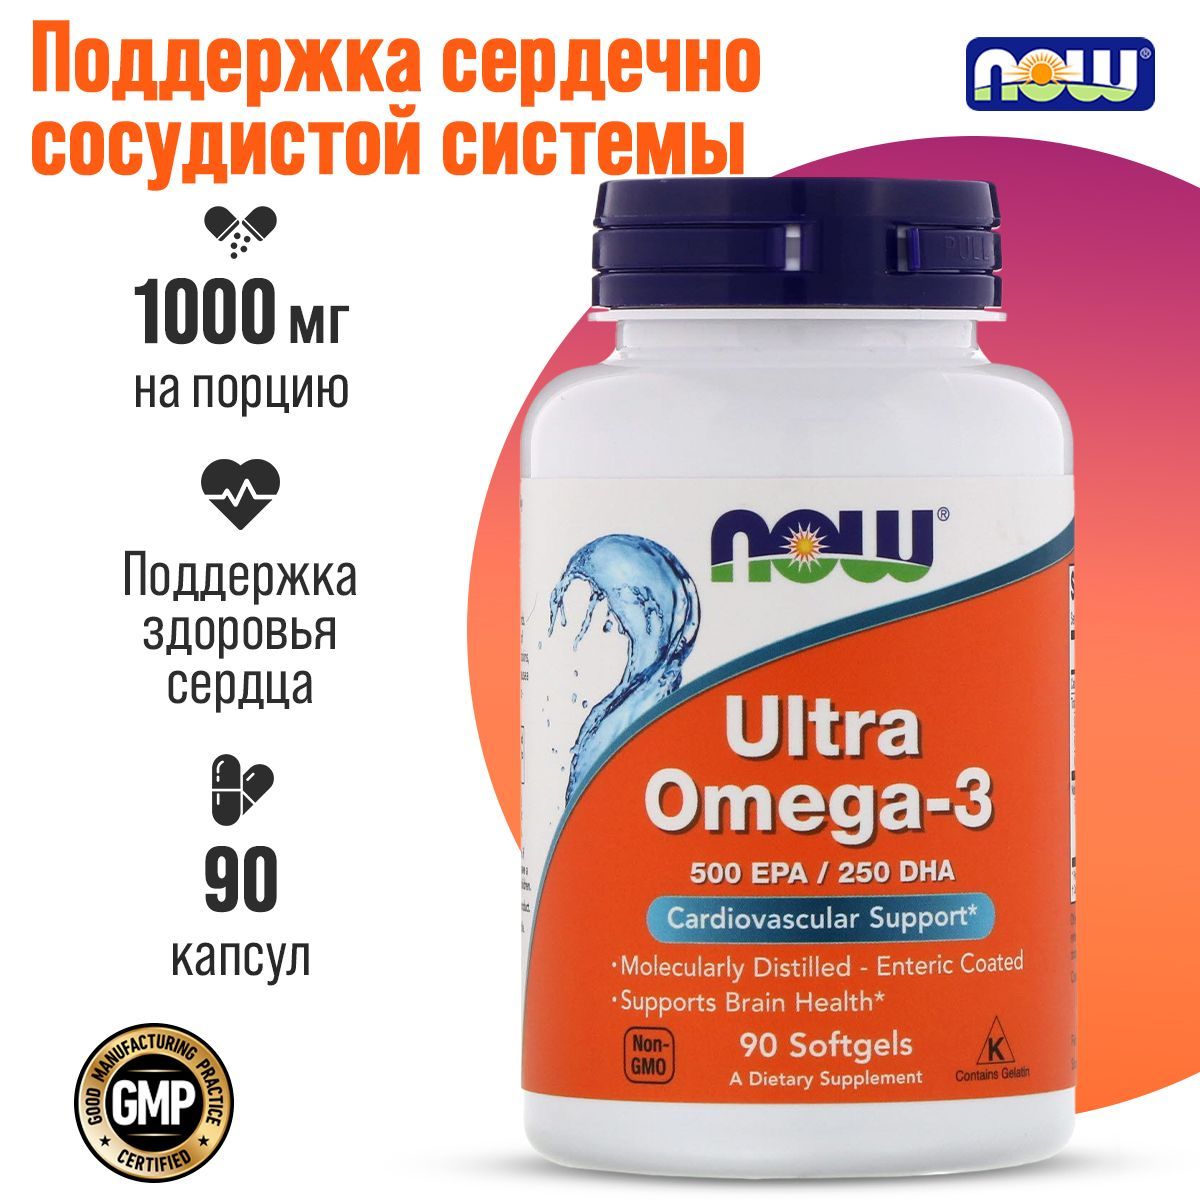 Ultra omega 3 капсулы now. Now Ultra Omega-3. Ультра Омега 3 Now 500 капсул. Омега 3 рыбий жир Now. Now Ultra Omega 3 90 Softgels.